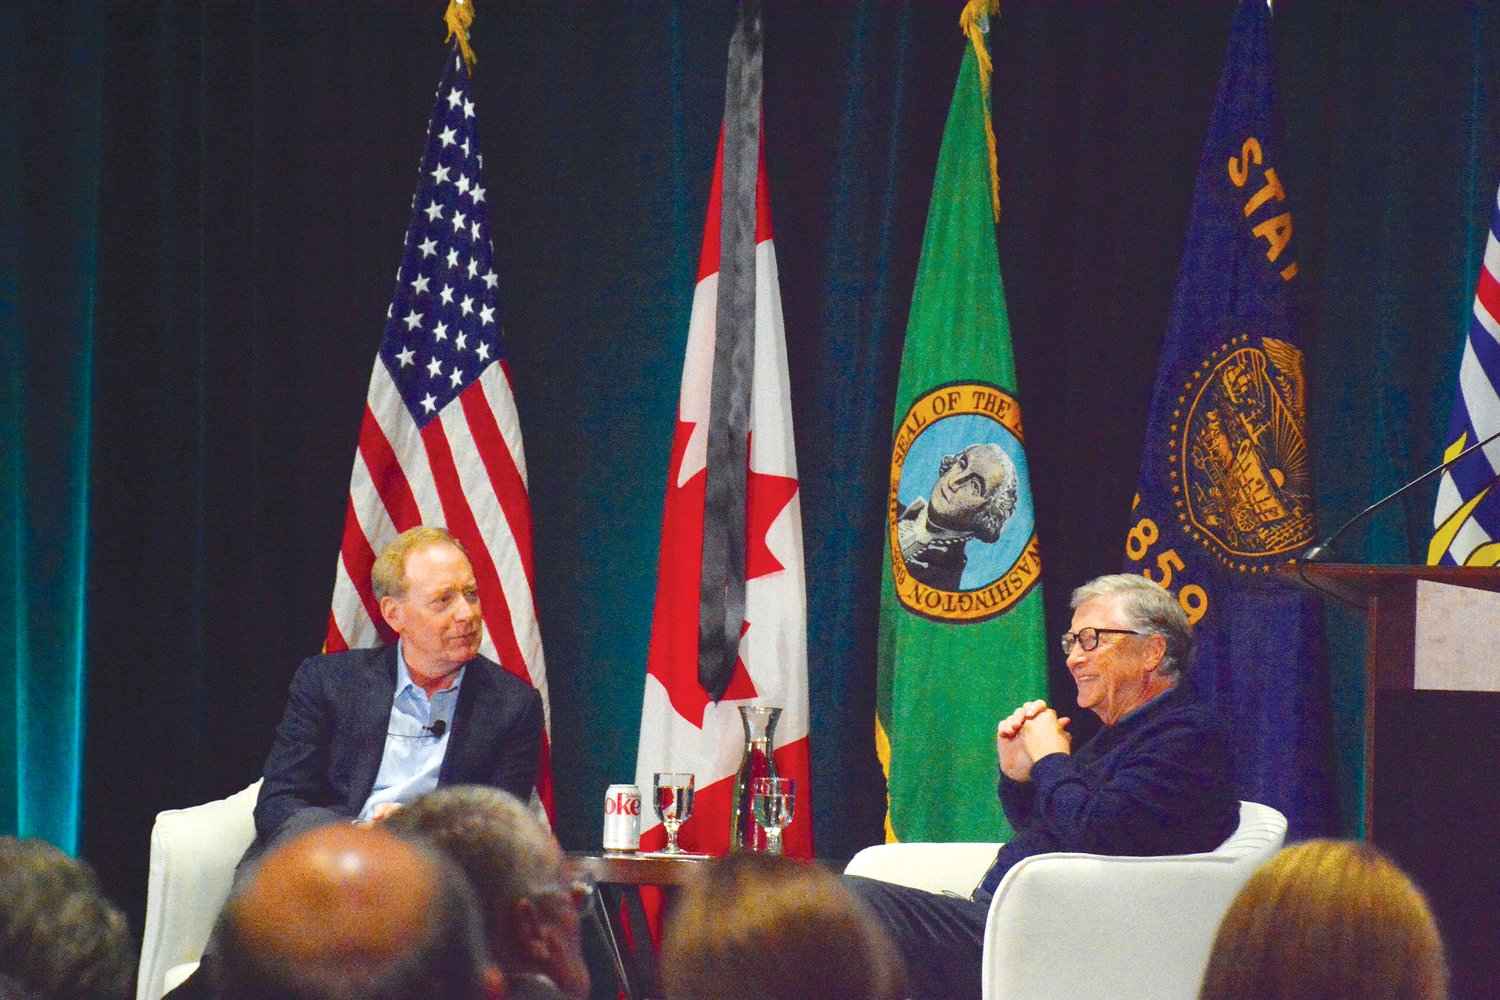 Brad Smith, Microsoft president and vice chair (l.), and Microsoft co-founder Bill Gates discuss climate action at the 2022 Cascadia Innovation Corridor’s “Cascadia 2050 vision: Moving to climate action” conference at Semiahmoo Resort on September 12.